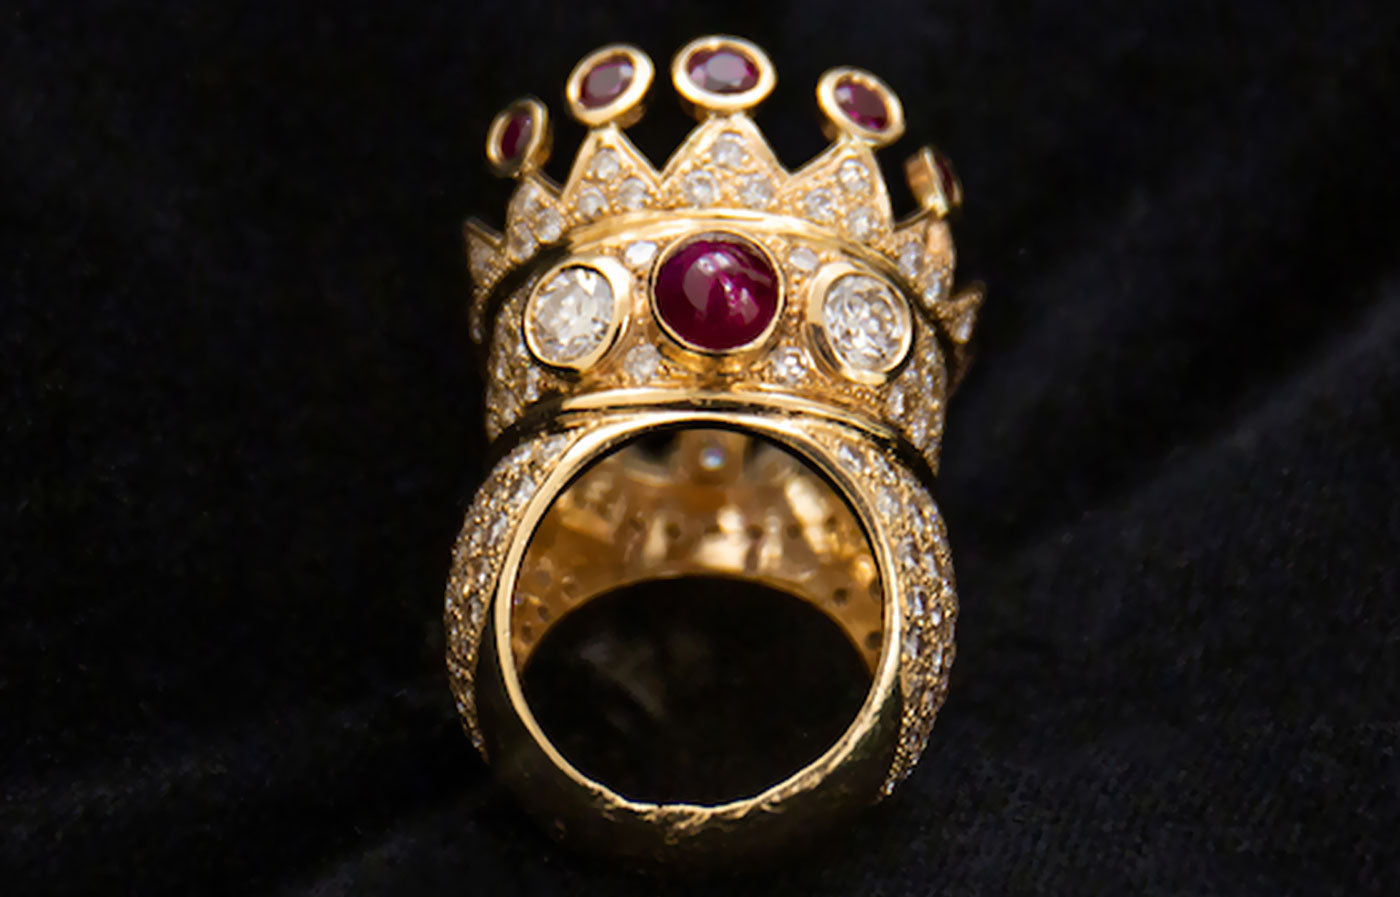 Tupac Gold, Diamond and Ruby Crown Ring |  Hip Hop is 50 - An Exploration of Hip Hop Jewelry Trends | Saratti 